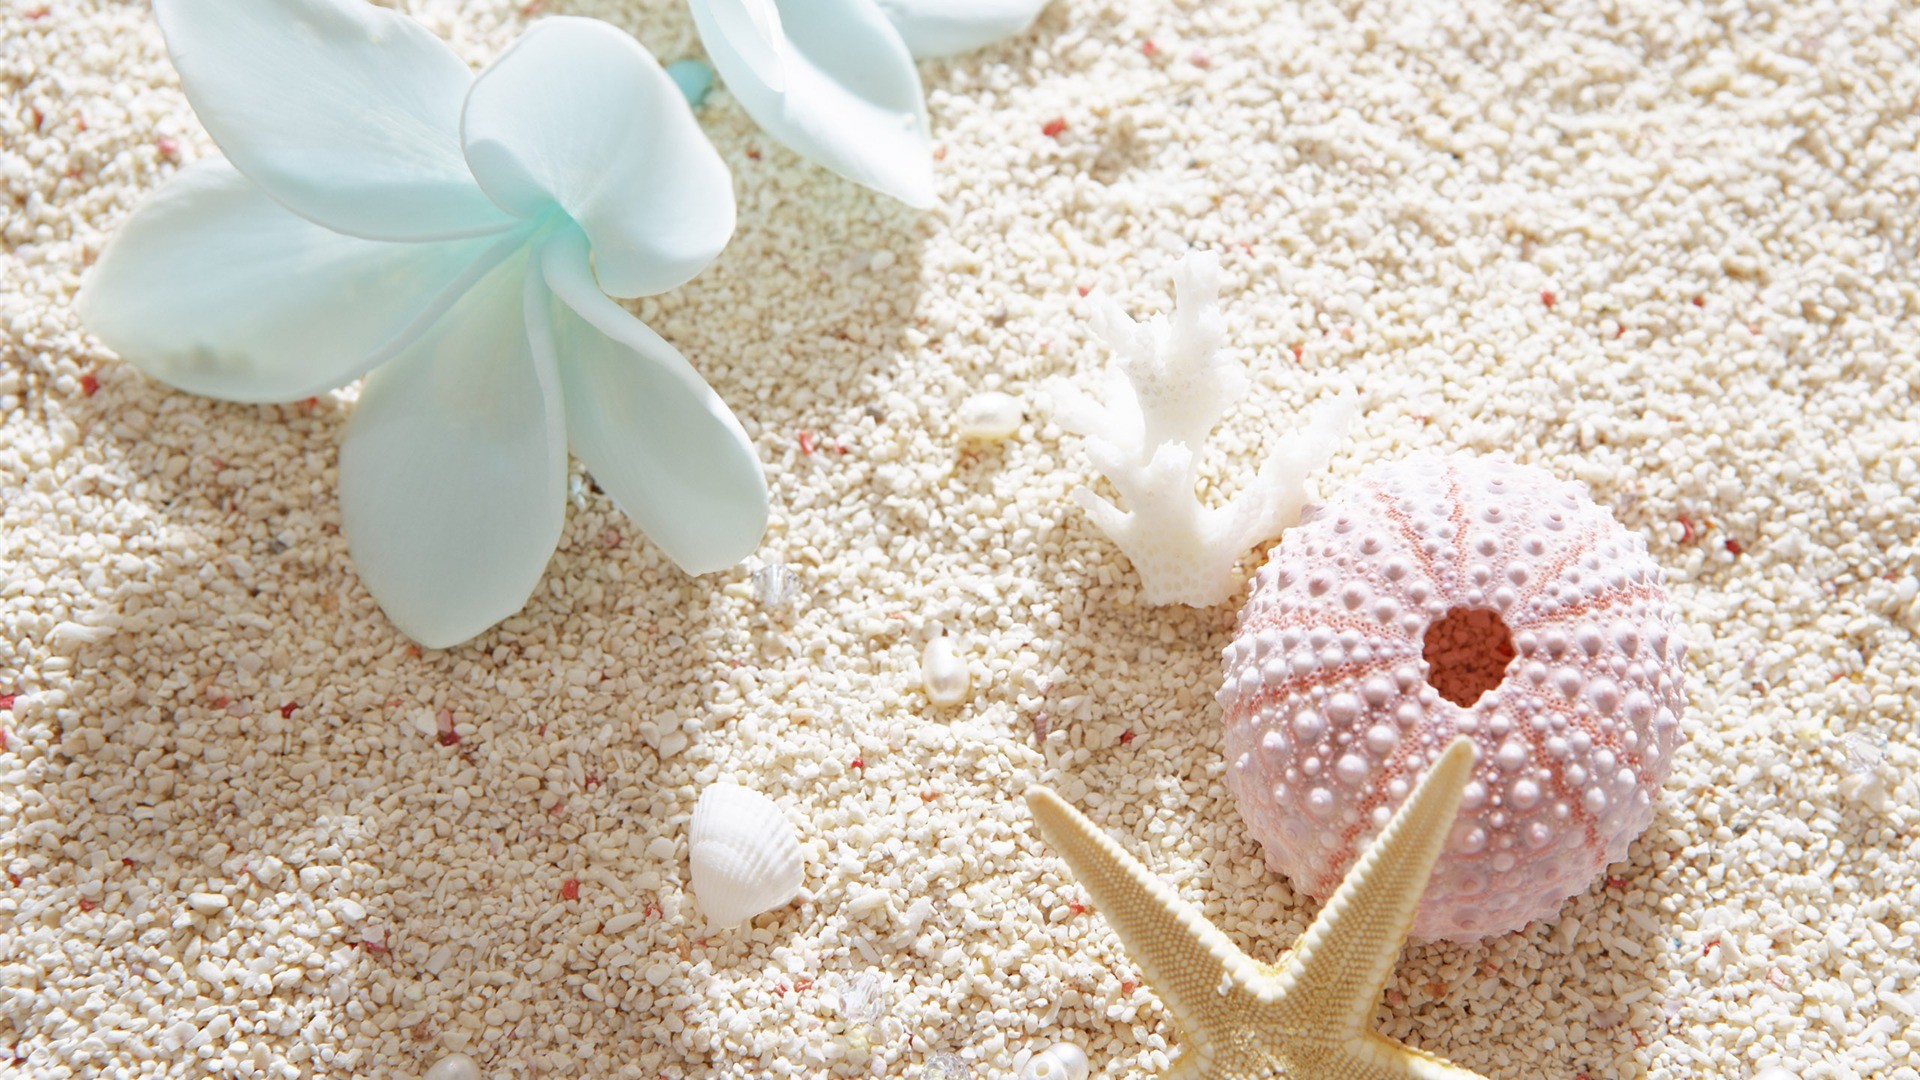 Shell Awesome Hd Wallpapers 2015 - Flowers And Shells On The Beach - HD Wallpaper 